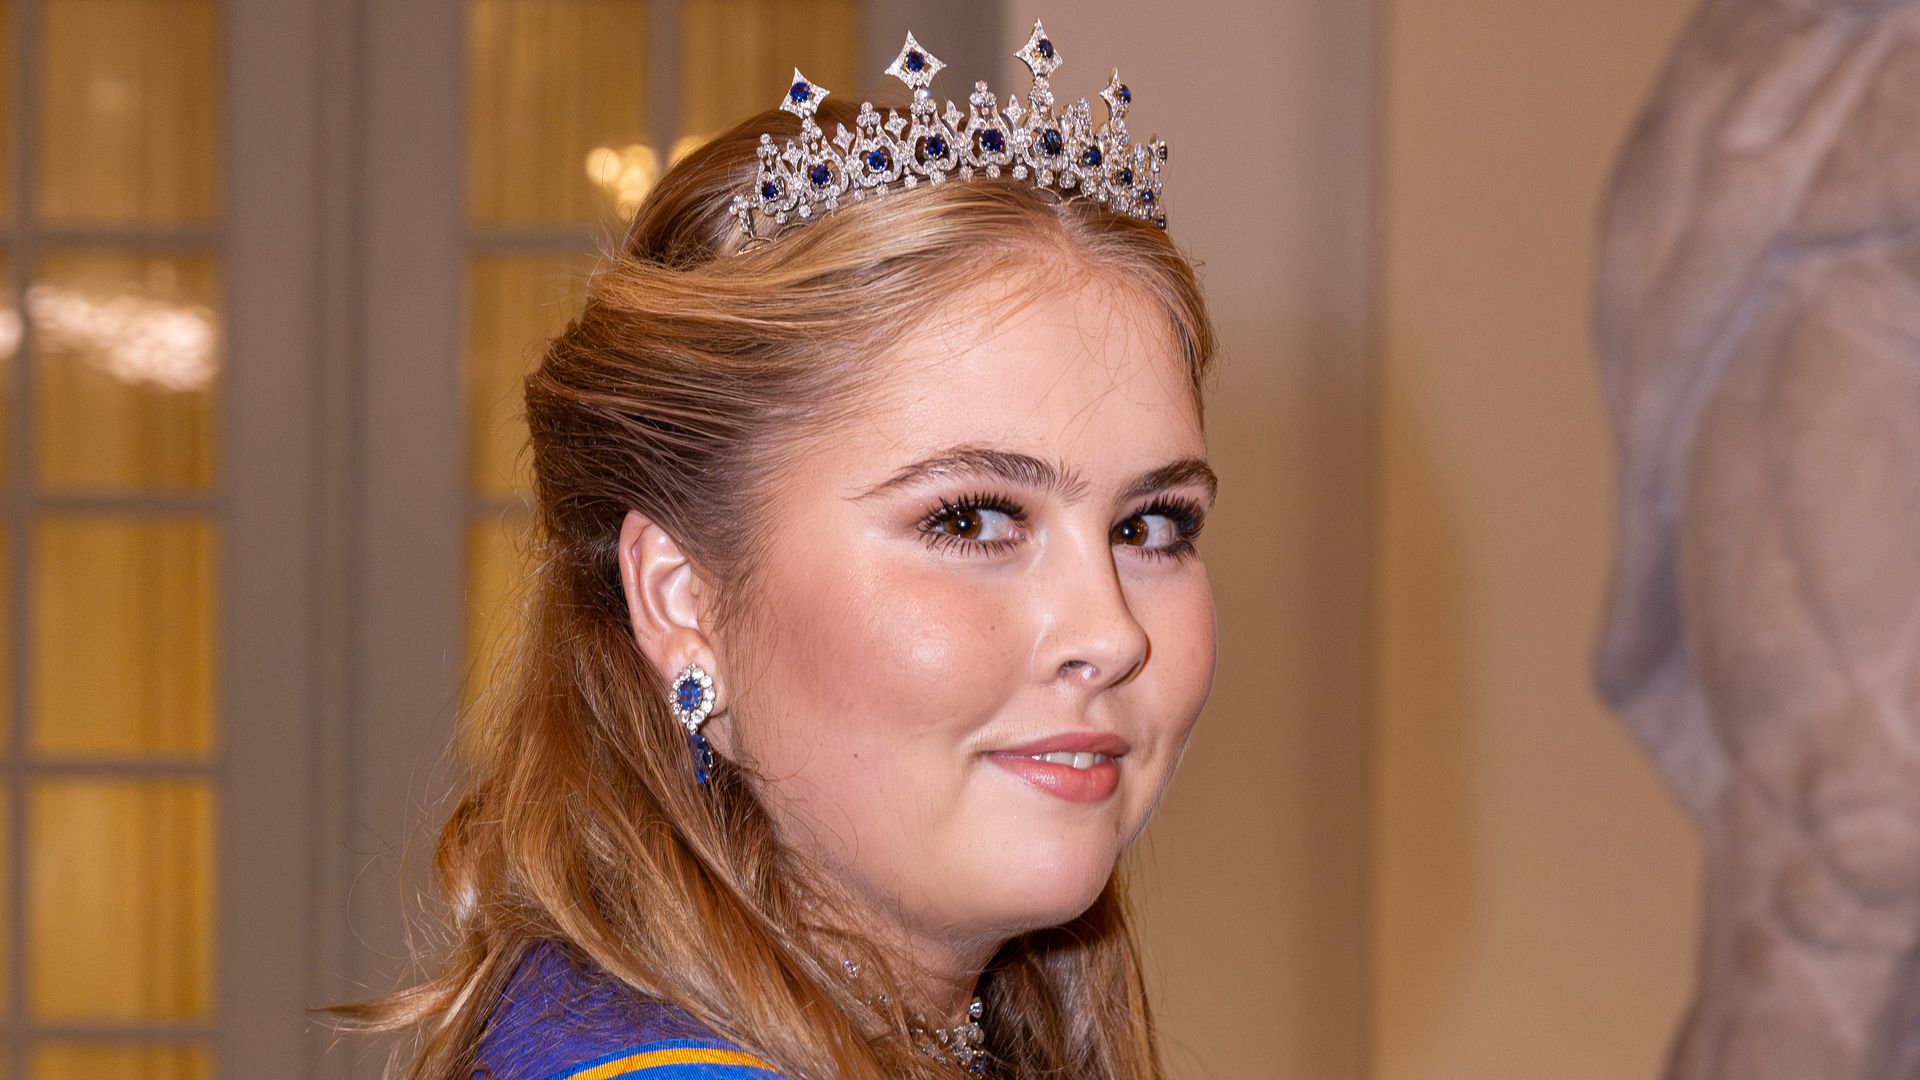 Princess Amalia of the Netherlands attend the gala diner to celebrate the 18th birthday of Prince Christian at Christiansborg Palace